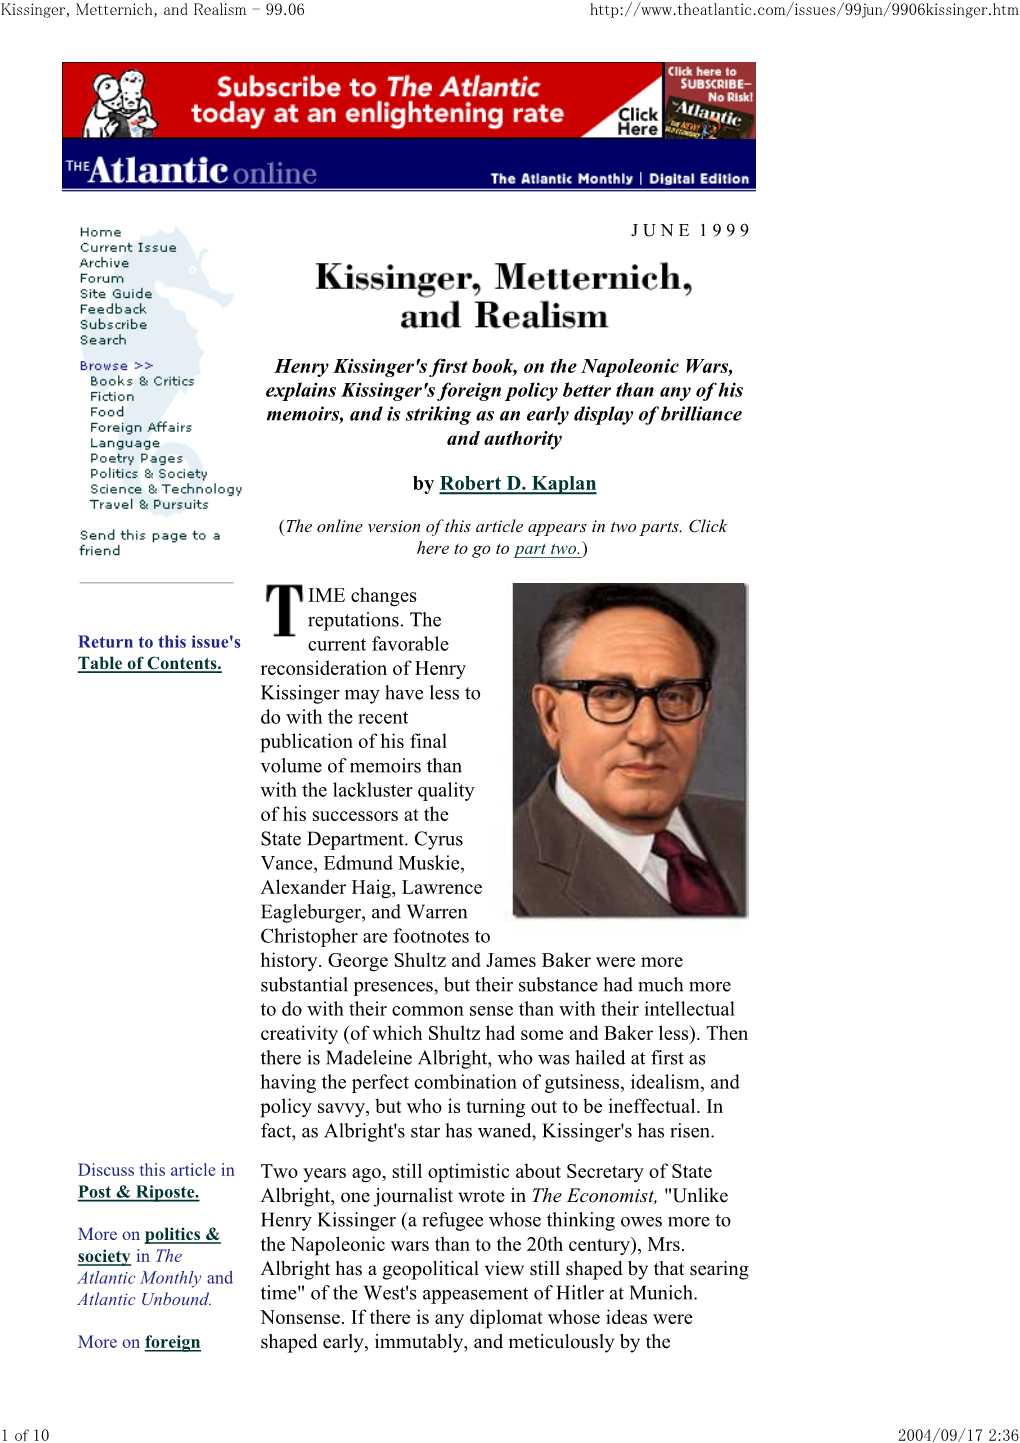 Kissinger, Metternich, and Realism - 99.06